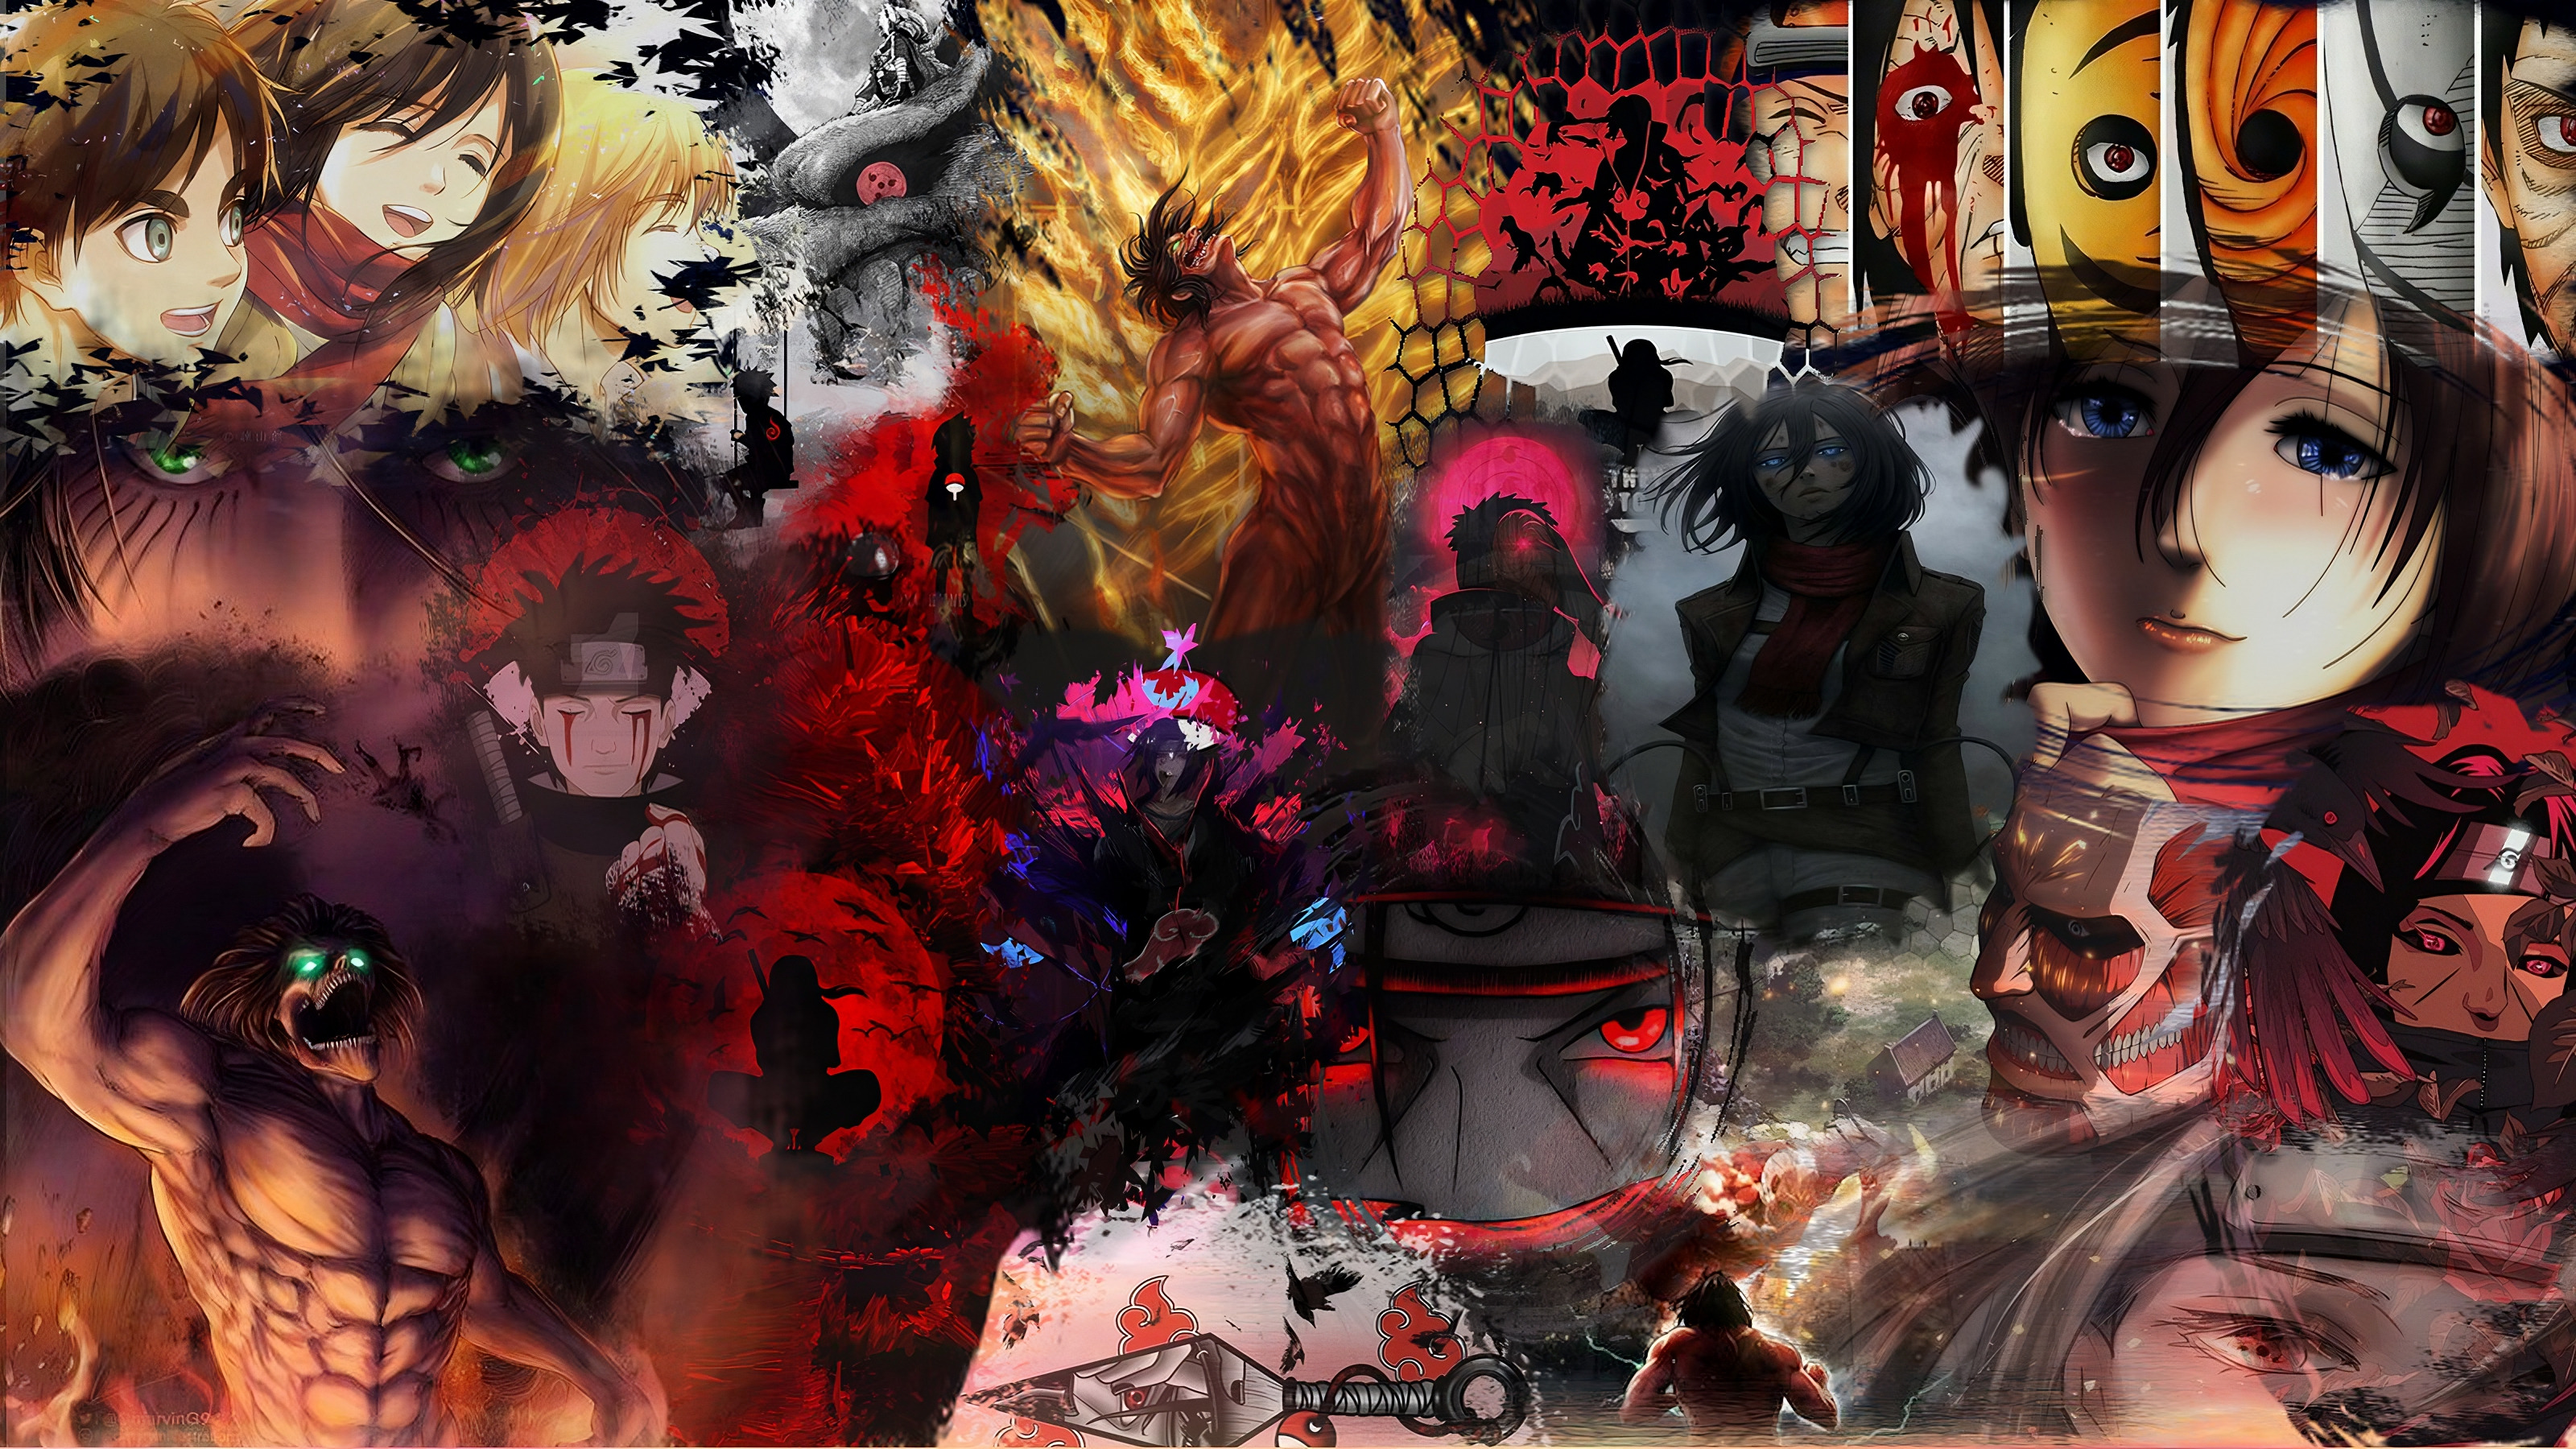 A dynamic crossover wallpaper featuring the Uchiha Clan from Naruto, the Attack on Titan cast, and the Akatsuki organization.